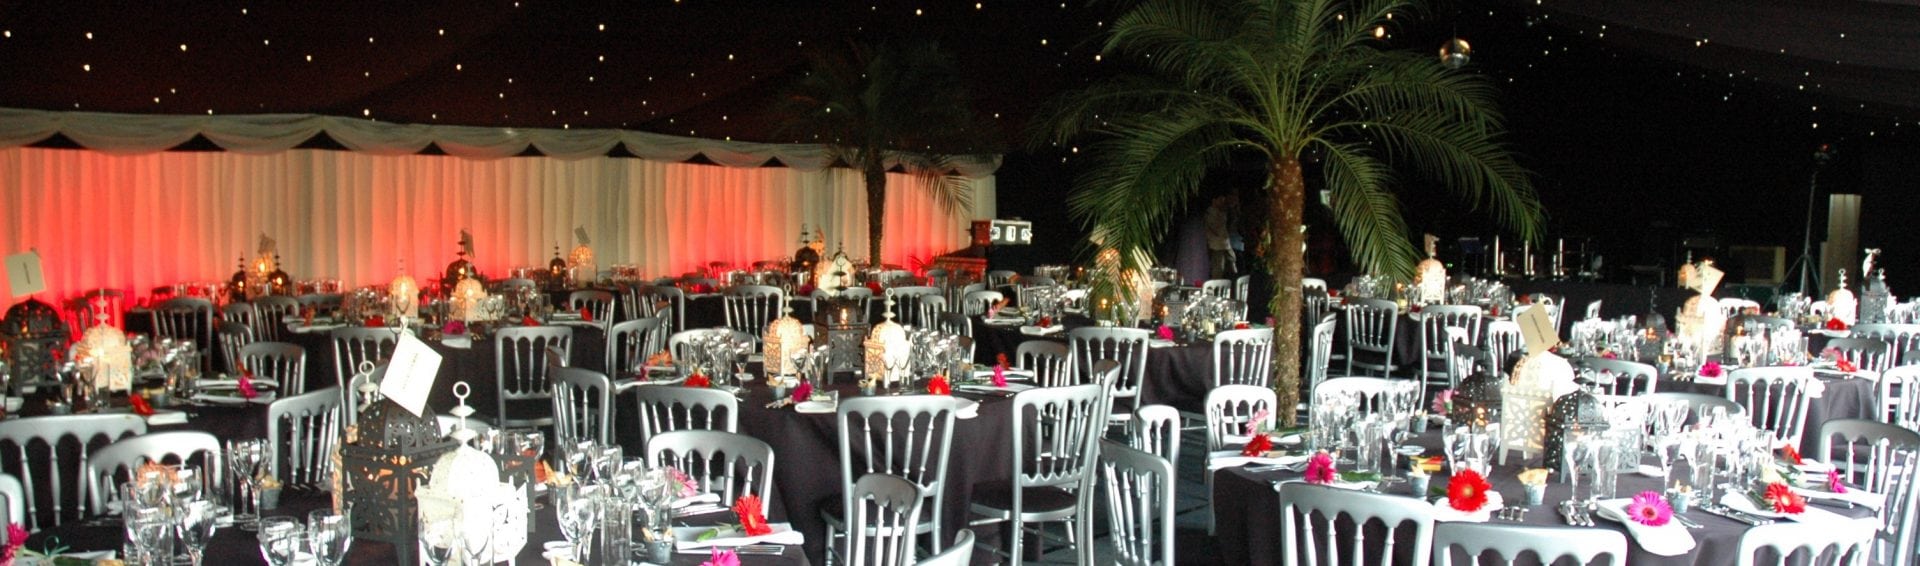 Marquee decor and theming